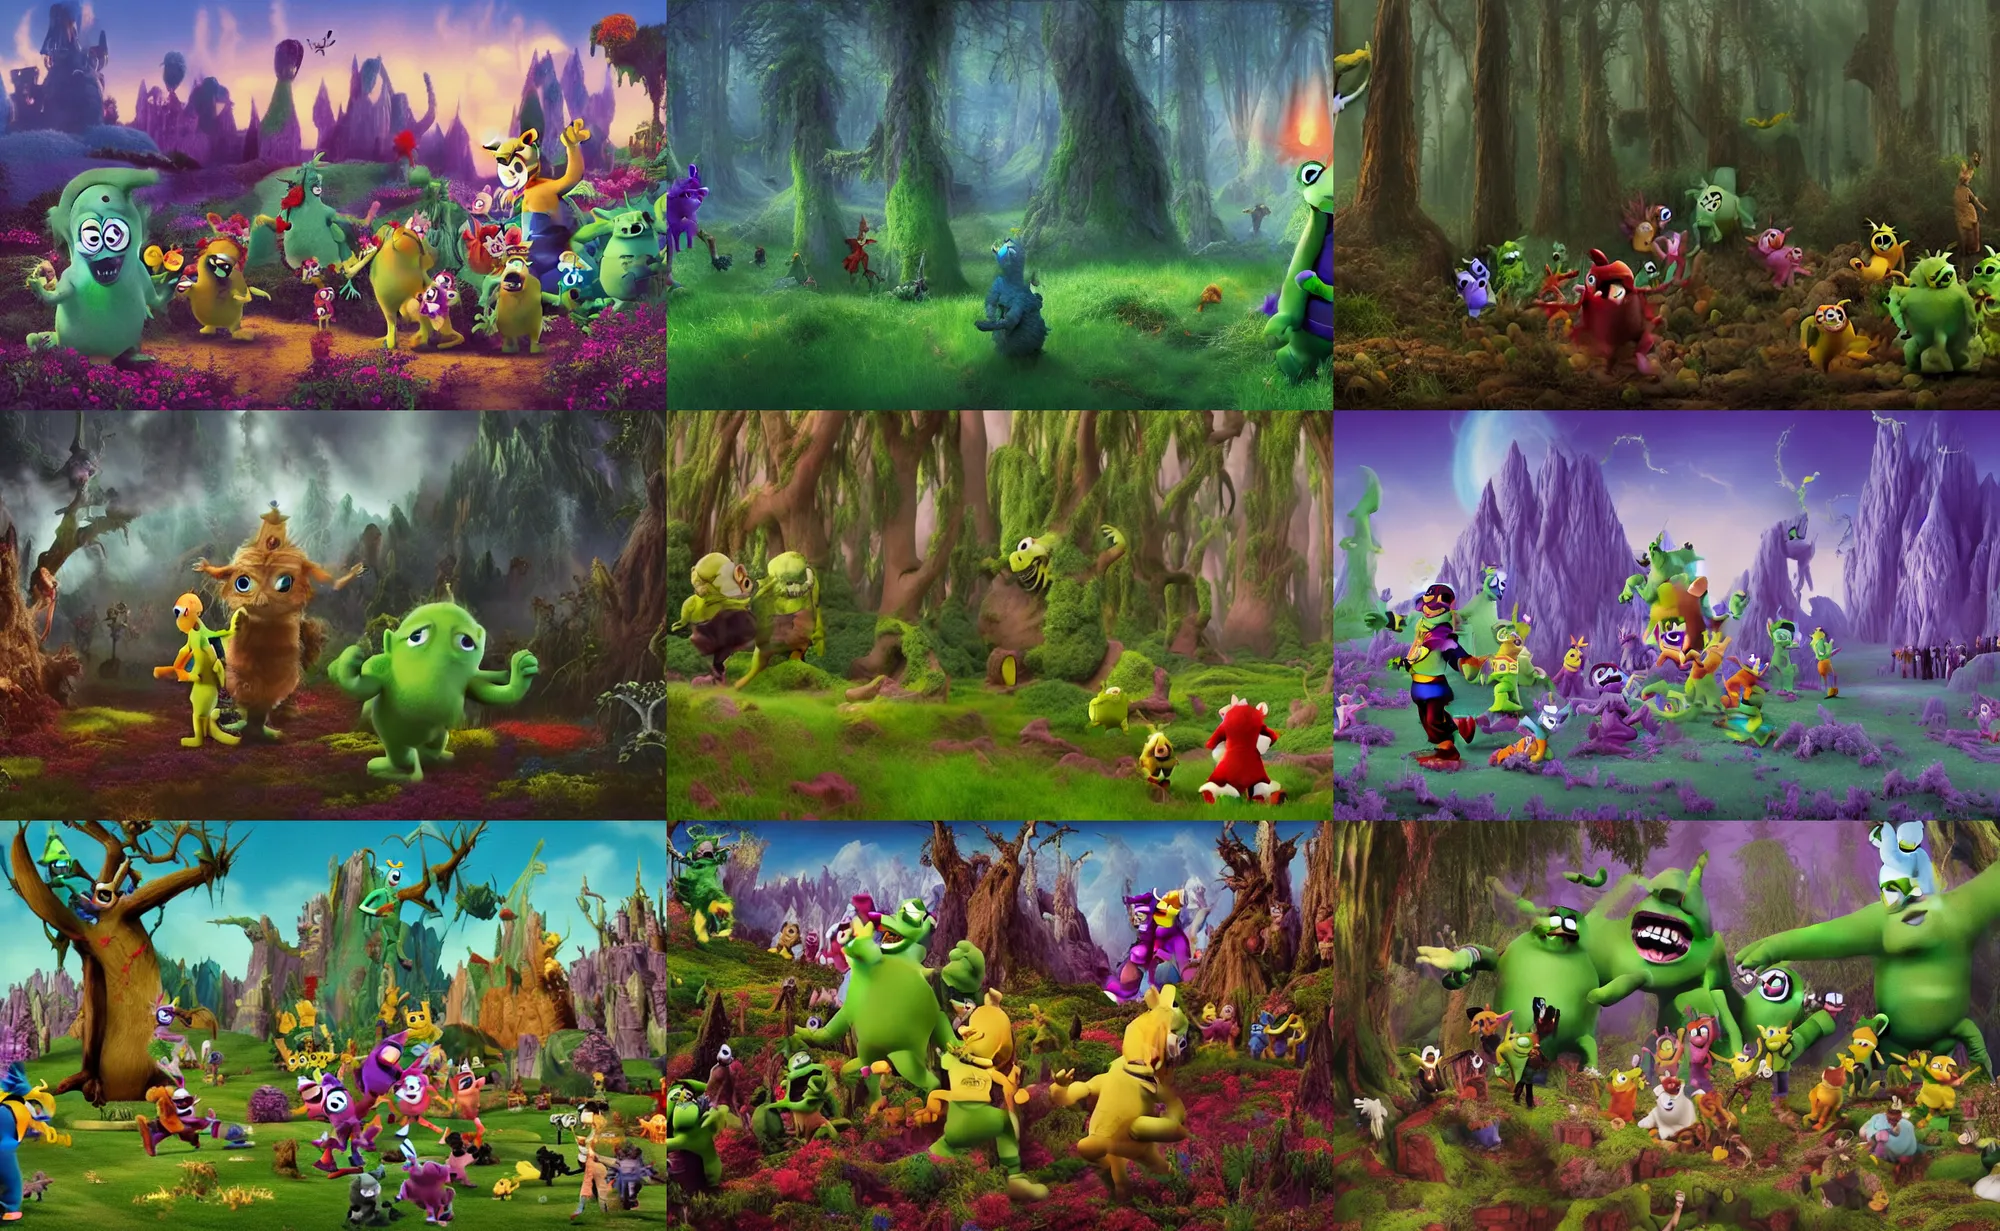 Prompt: Movie frame from the edgy Monster energy drink coloured Disney animated motion picture released in 1937, Monster energy drink Wimmelbild, a giant villain Teletubbies is murdering everyone with blood everywhere, beautiful enchanted forest full of critters, directed by Walt Disney, highly detailed background paintings by Thomas Kinkade, Minions digimon